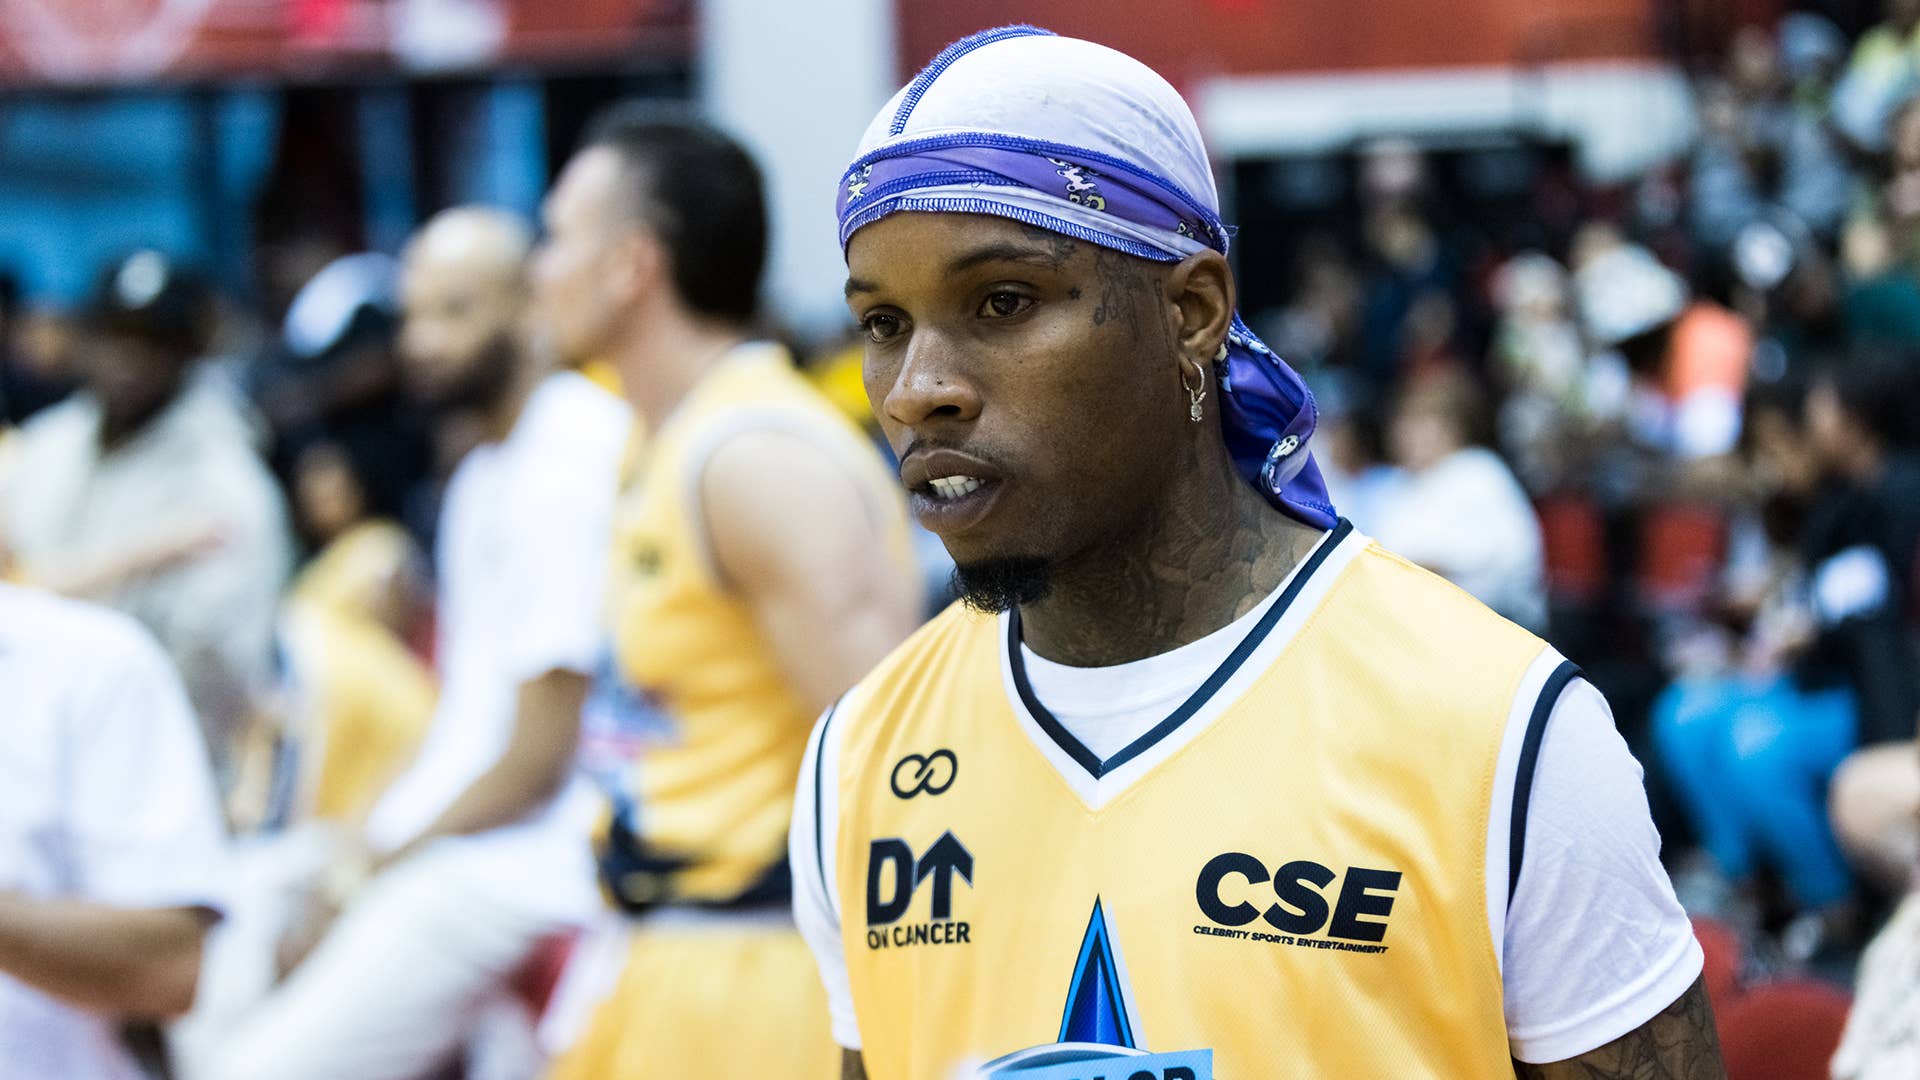 Tory Lanez attends the 2022 Parlor Games Celebrity Basketball Classic at the Cox Pavilion